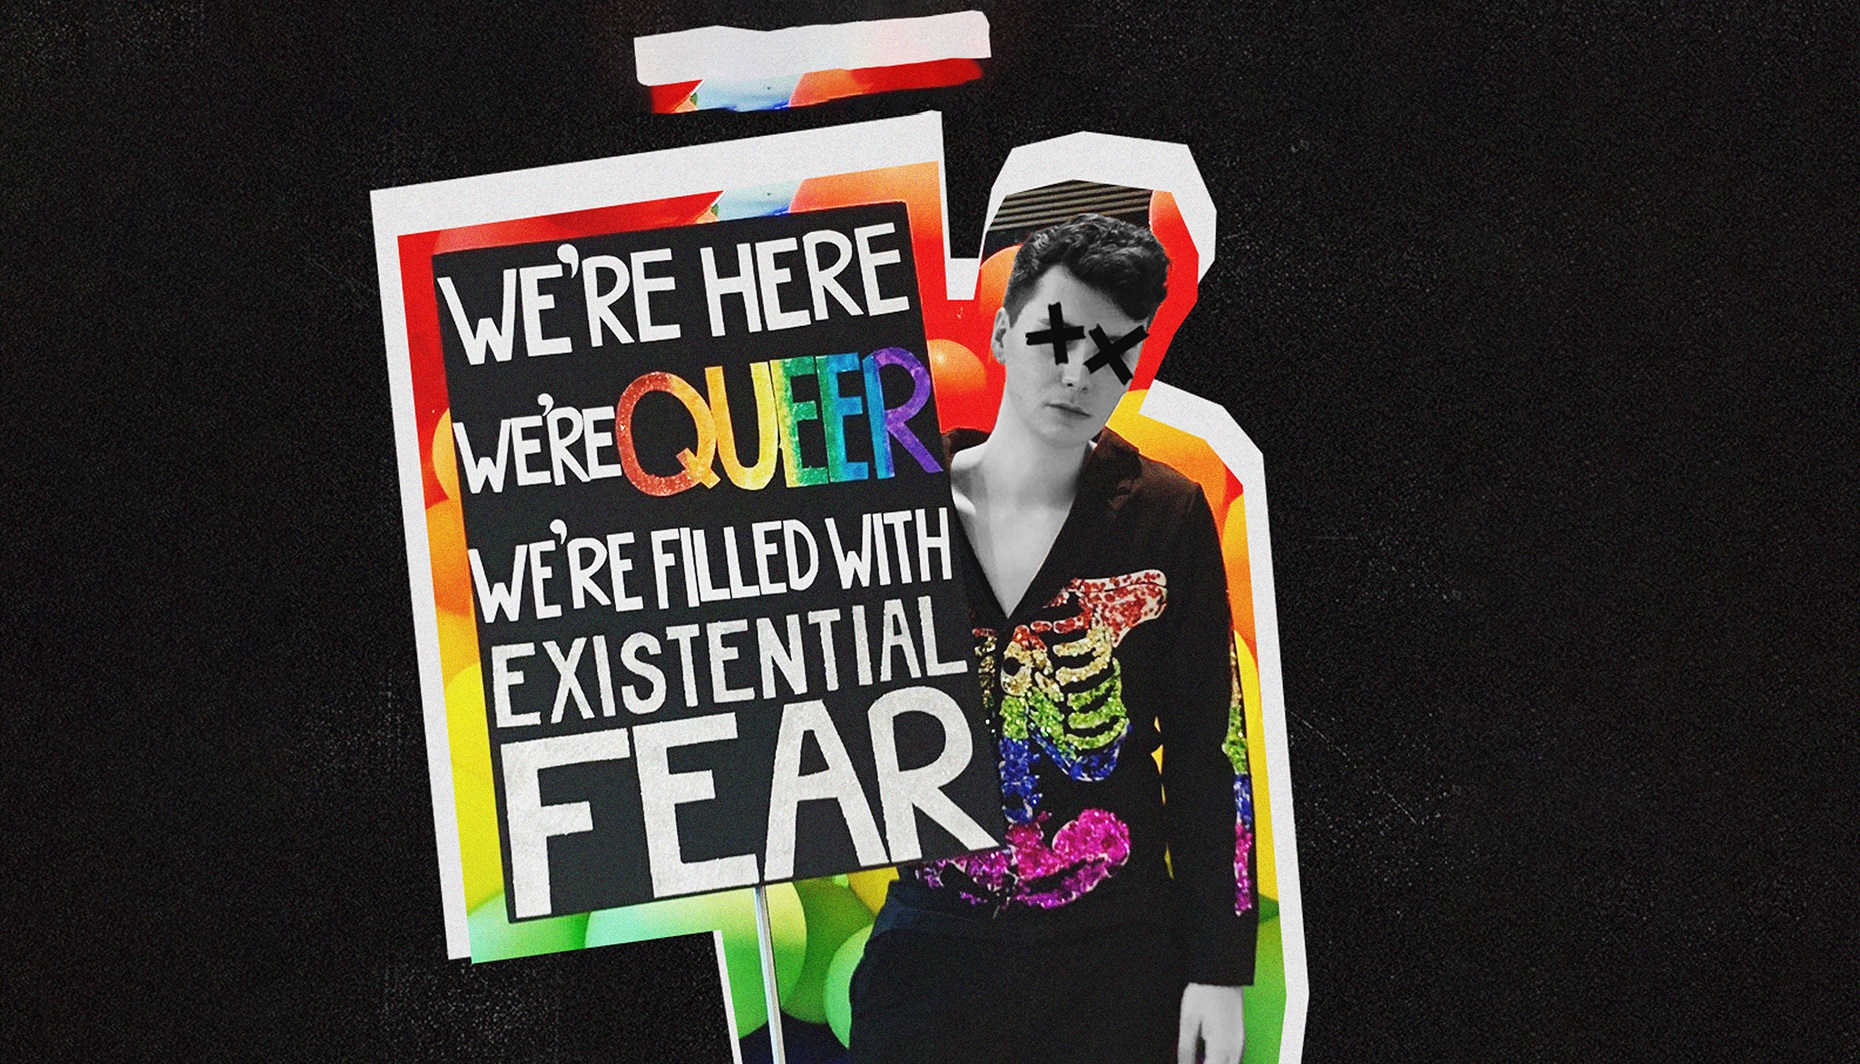 Daniel Howell Were Here Were Queer Were Filled With Existential